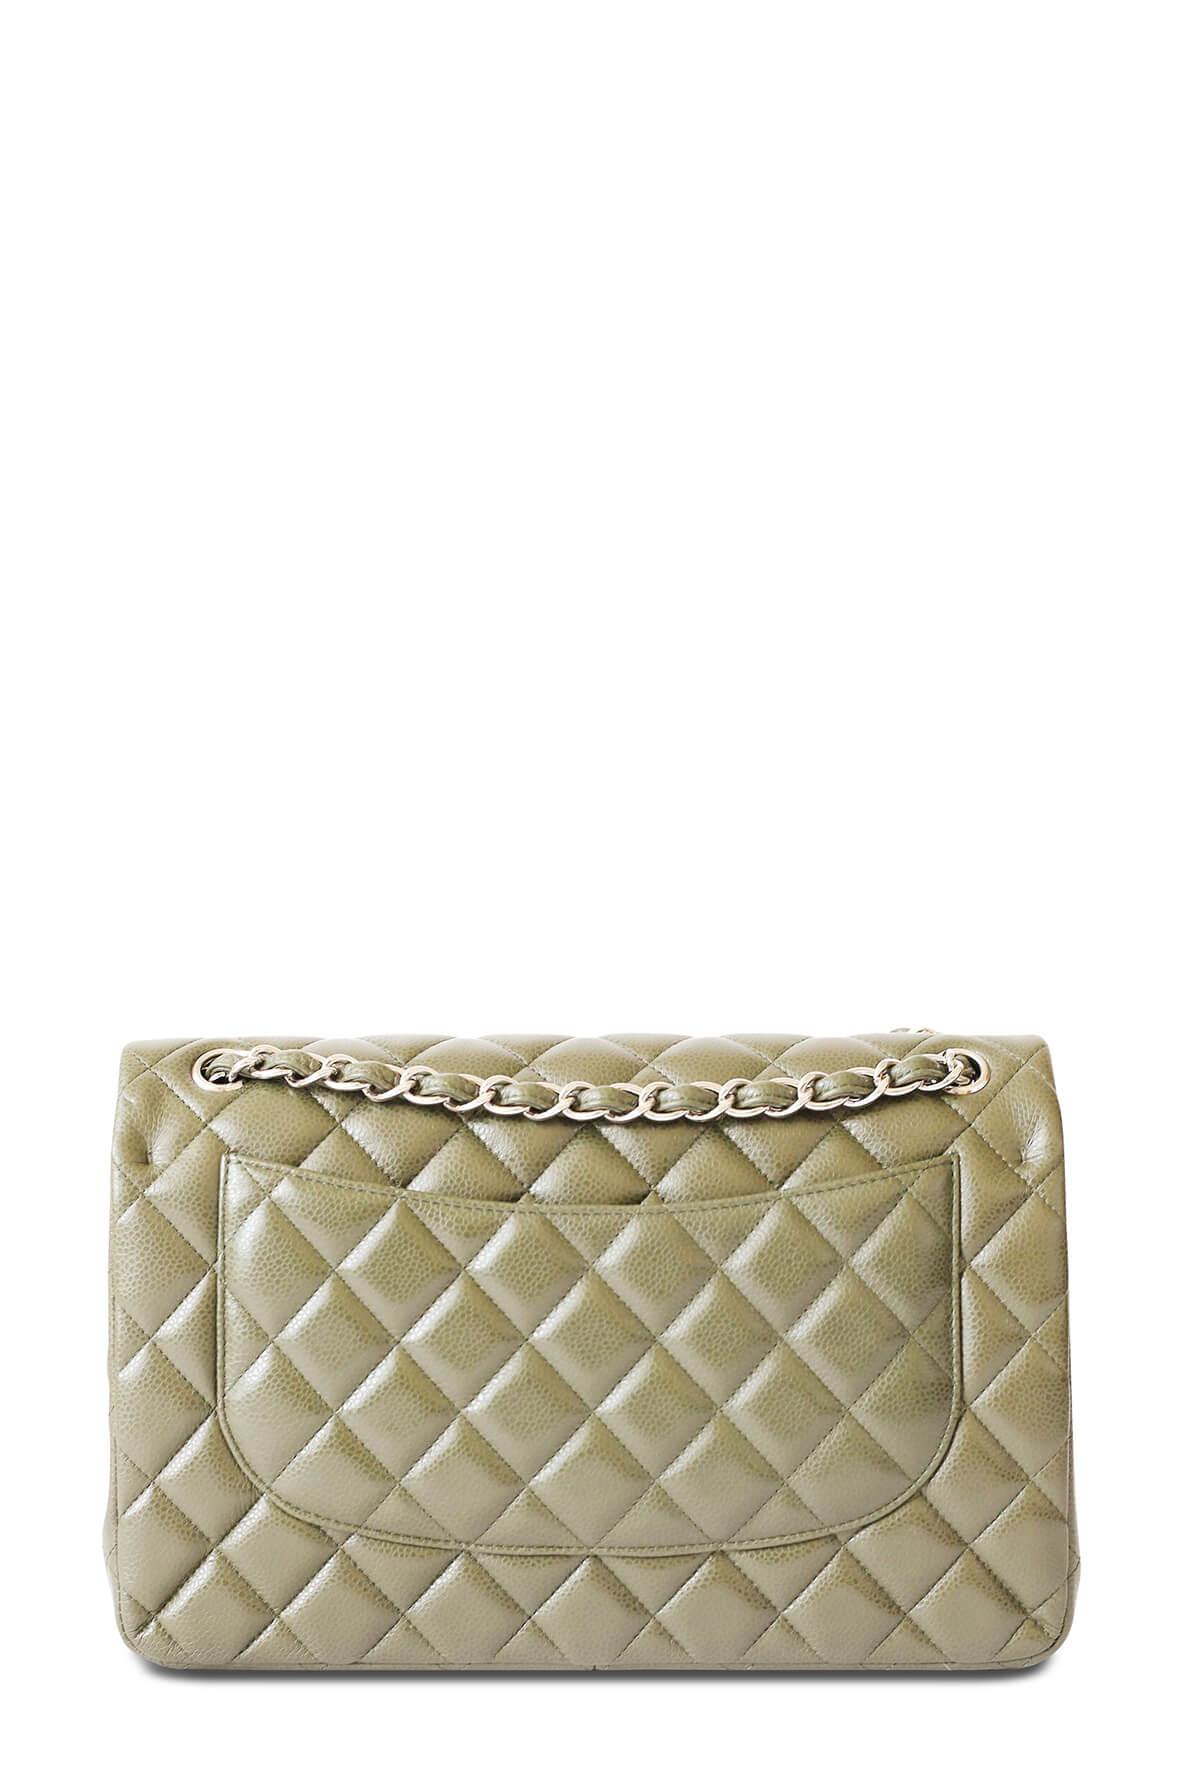 Quilted Caviar Jumbo Classic Flap Bag Khaki with Silver Hardware